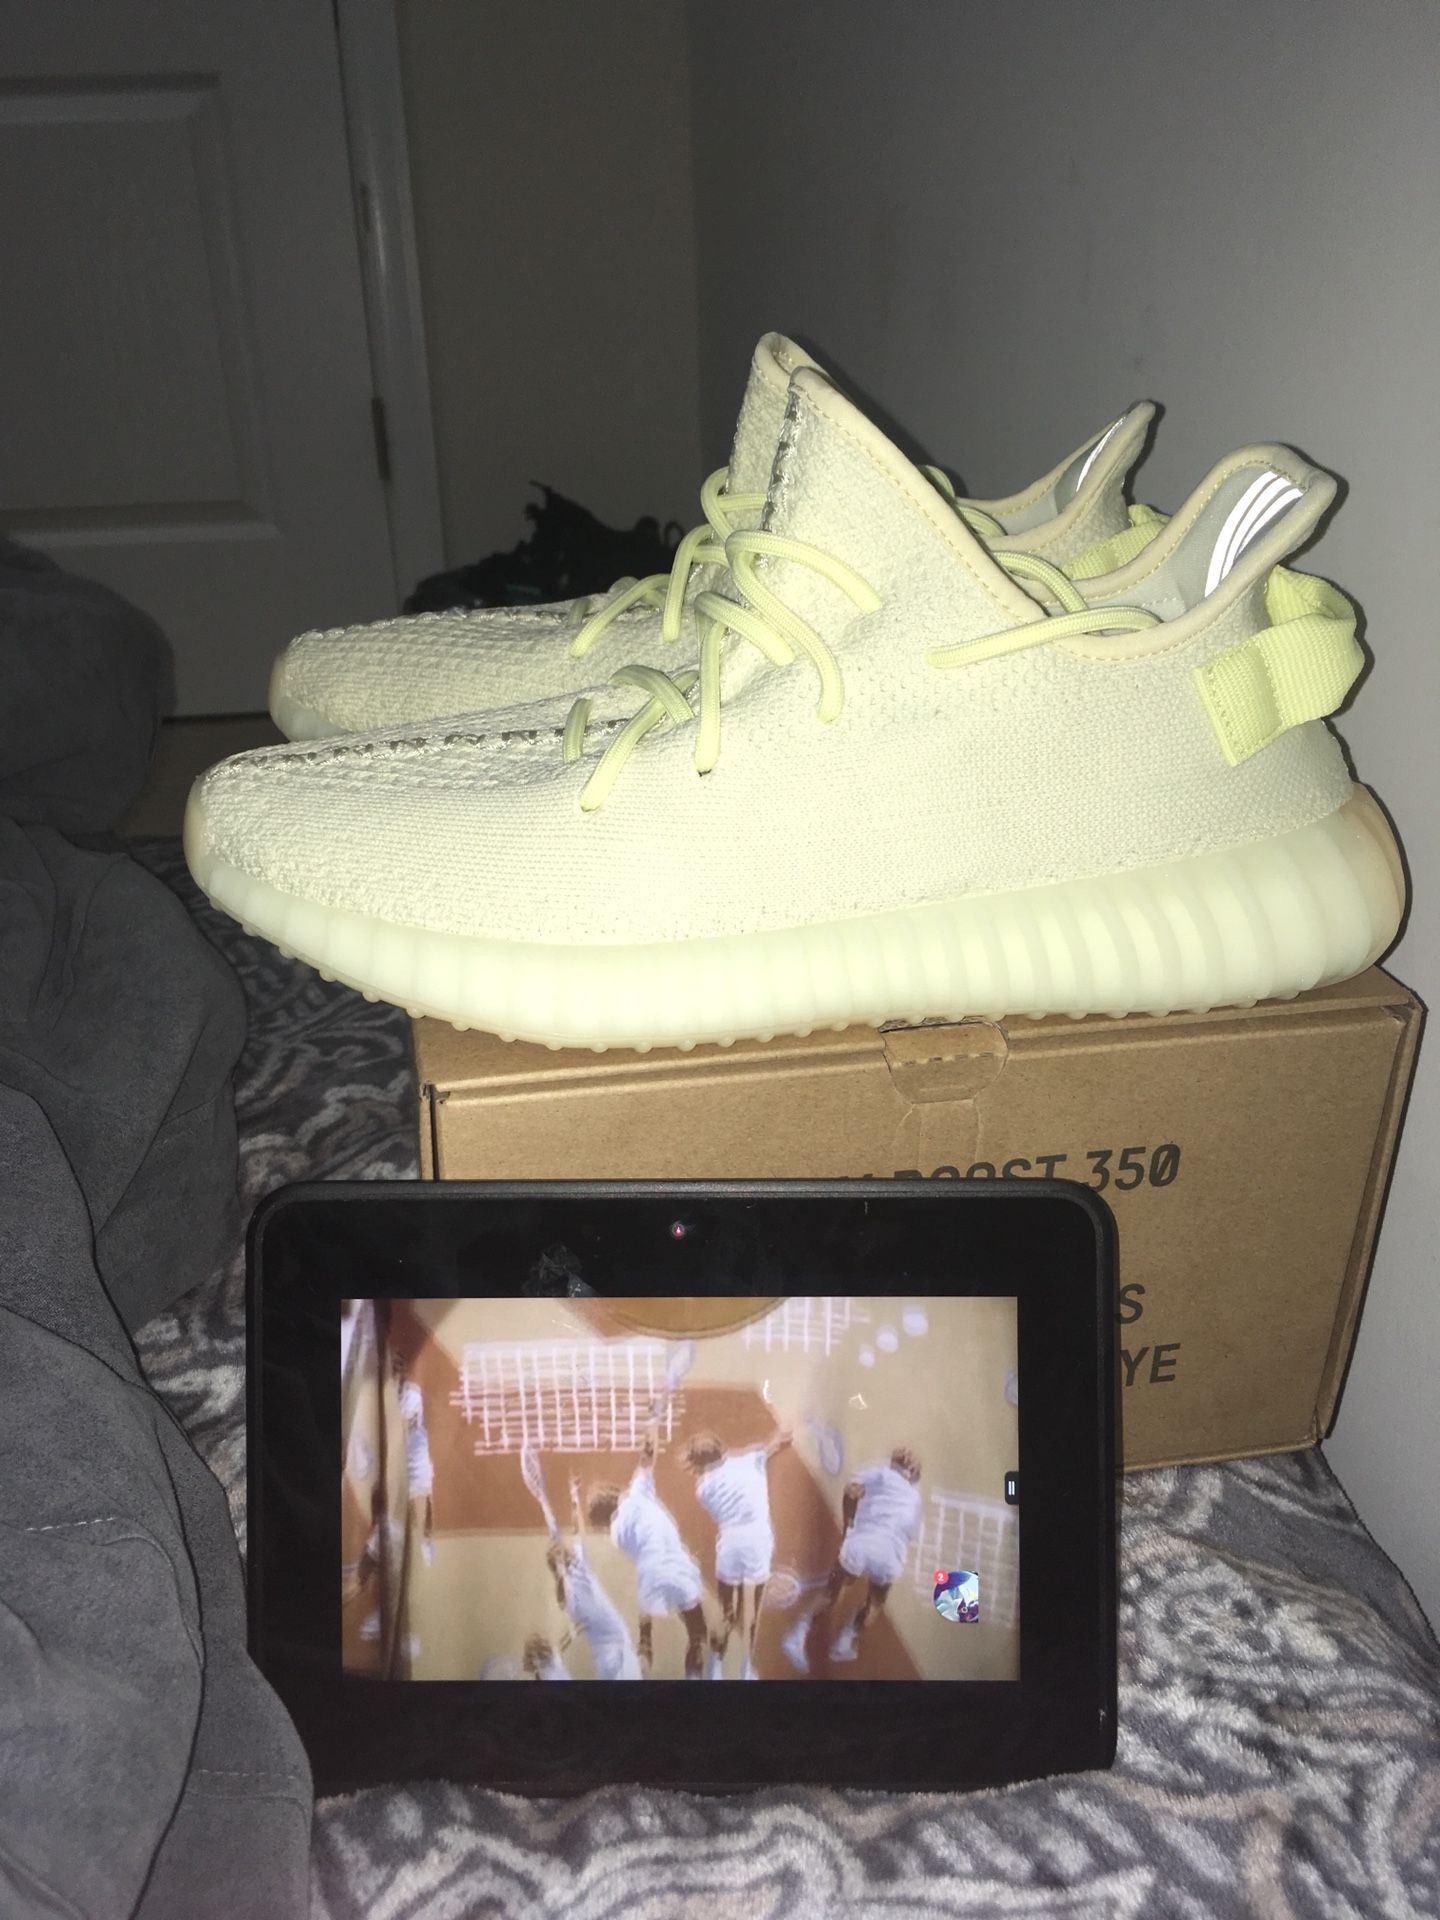 Vnds butters $200 $200 $200 SiZe 8.5